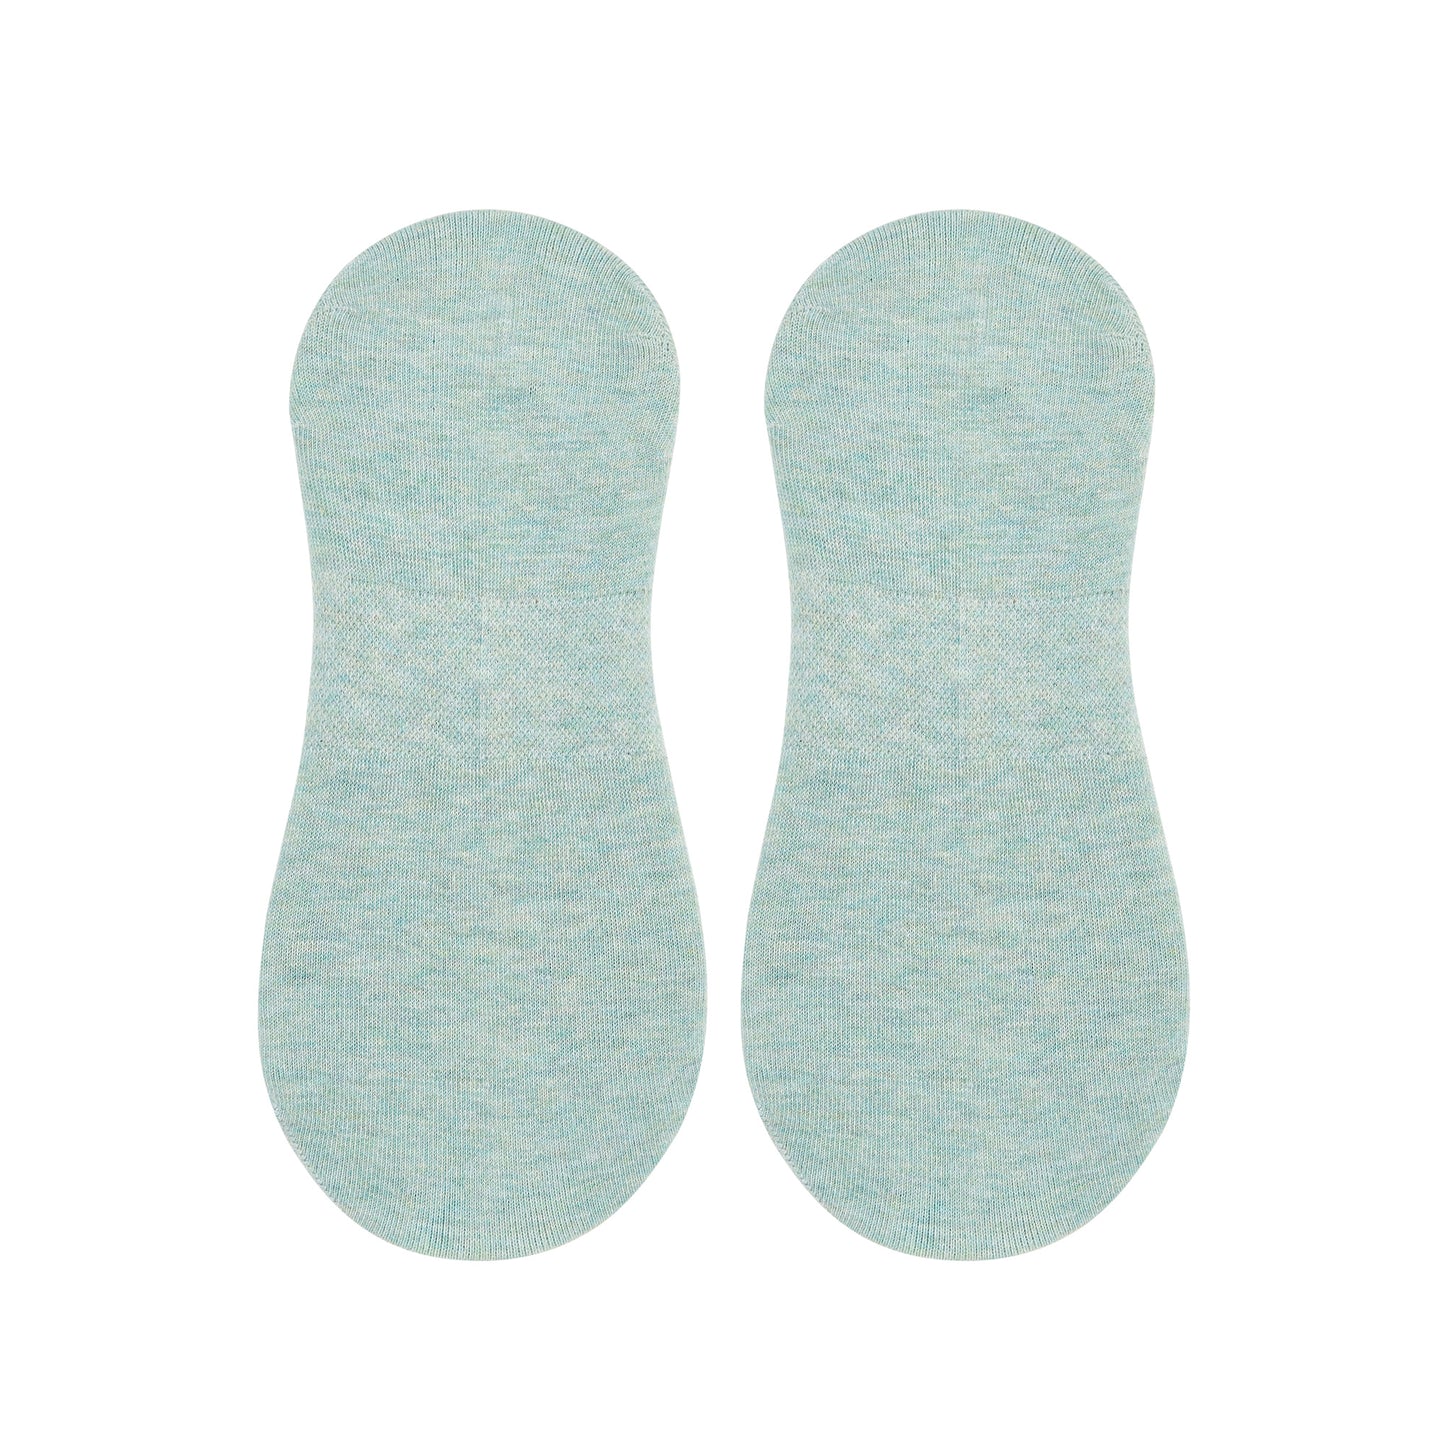 Women's Plain Candy Colored Invisible Foot Socks - IDENTITY Apparel Shop